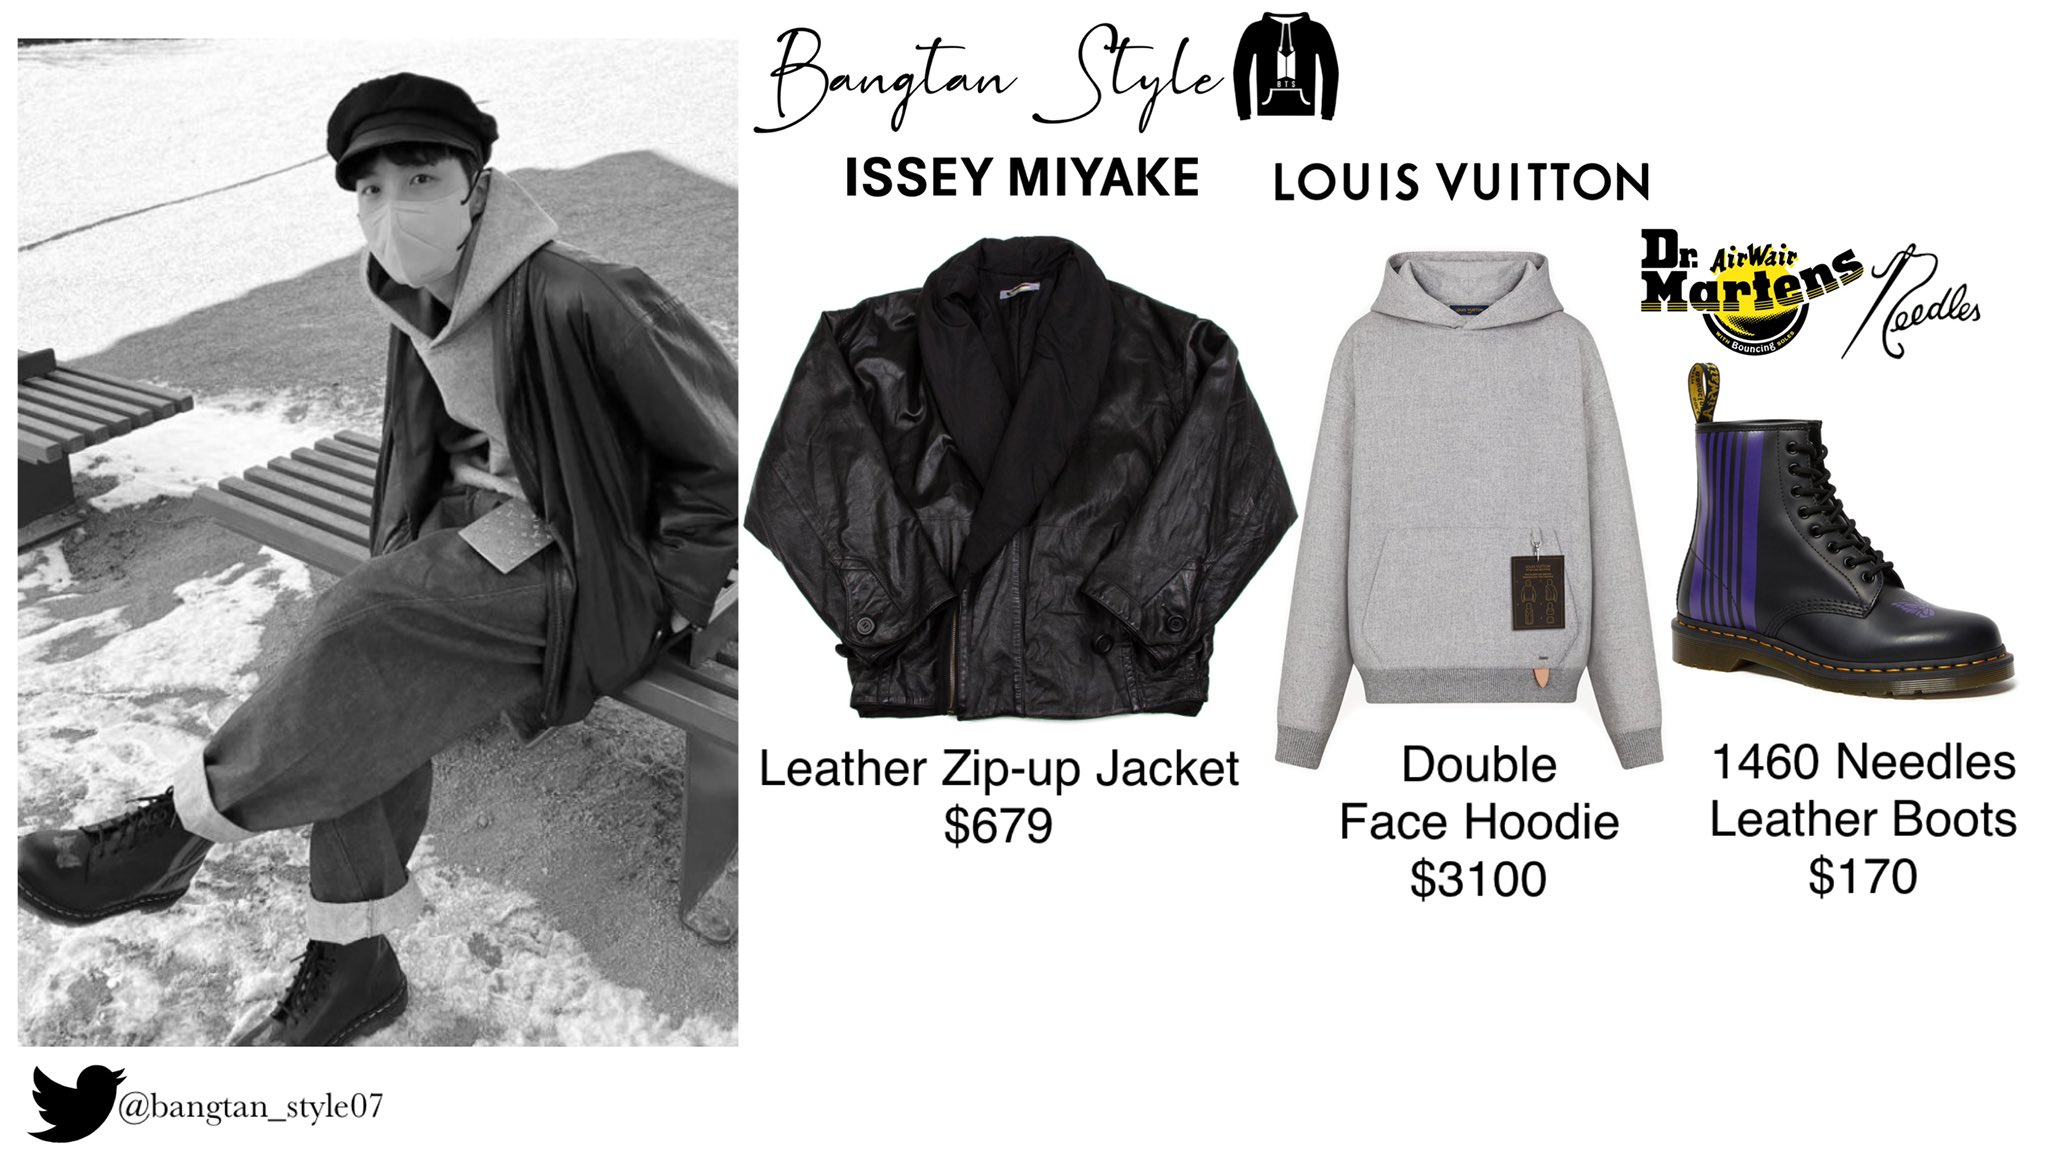 Bangtan Style⁷ (slow) on X: JHOPE Instagram Post 220210 [ Yeezy Jacket, Louis  Vuitton Sweater, Lemaire Pants, Supreme x Clarks Wallabees, JW Anderson  Neckband, Human Made Socks ] #JHOPE #BTS #Butter #BTS_Butter @